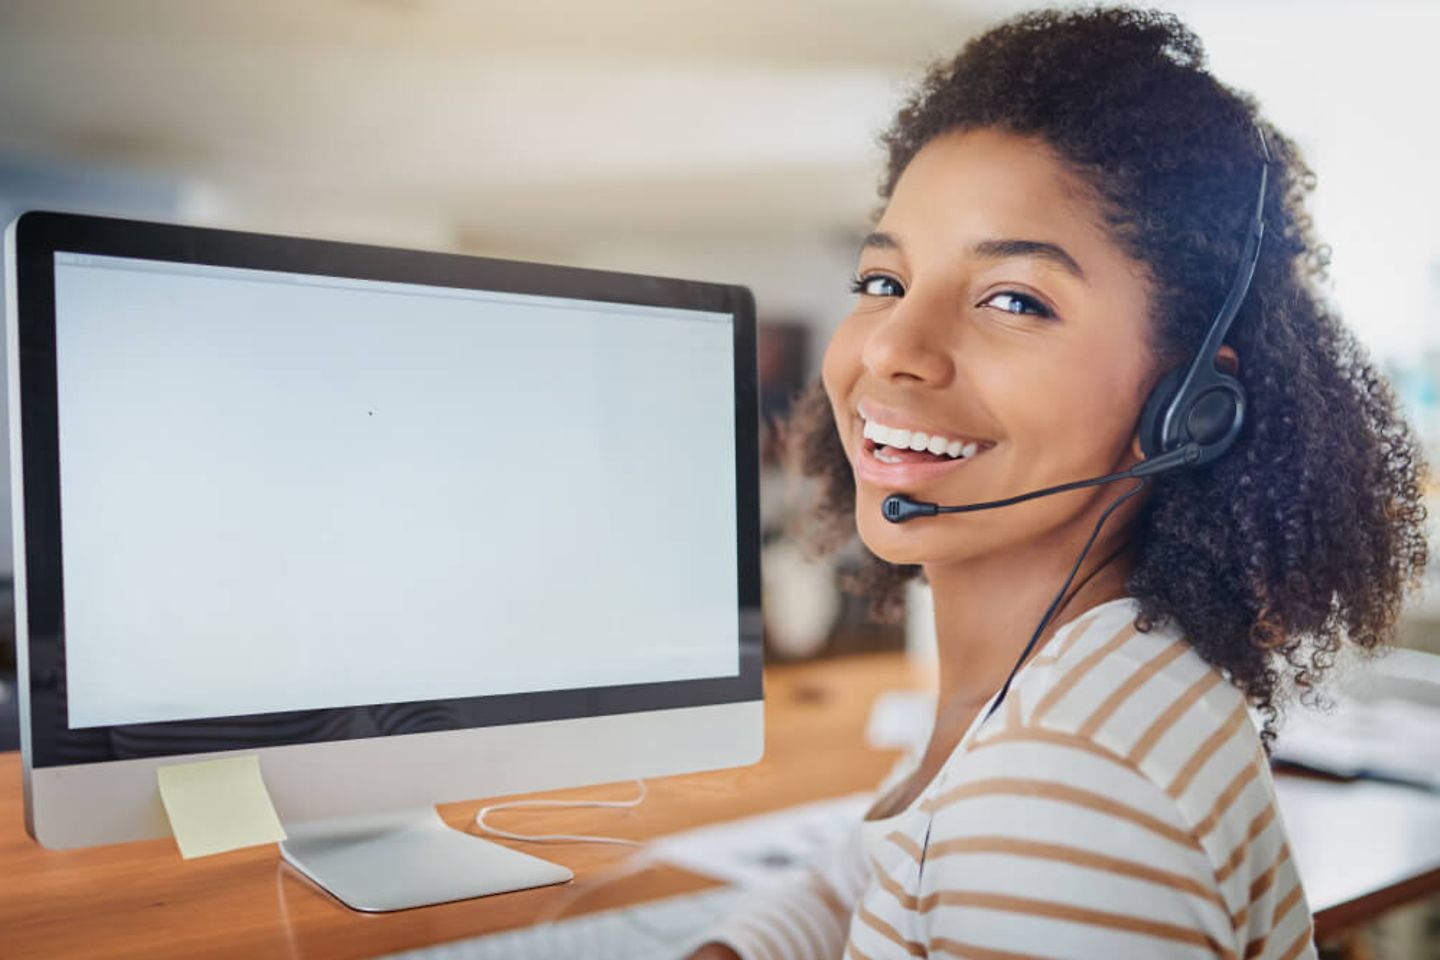 Woman sitting in front of a monitor wearing a headset and smiling